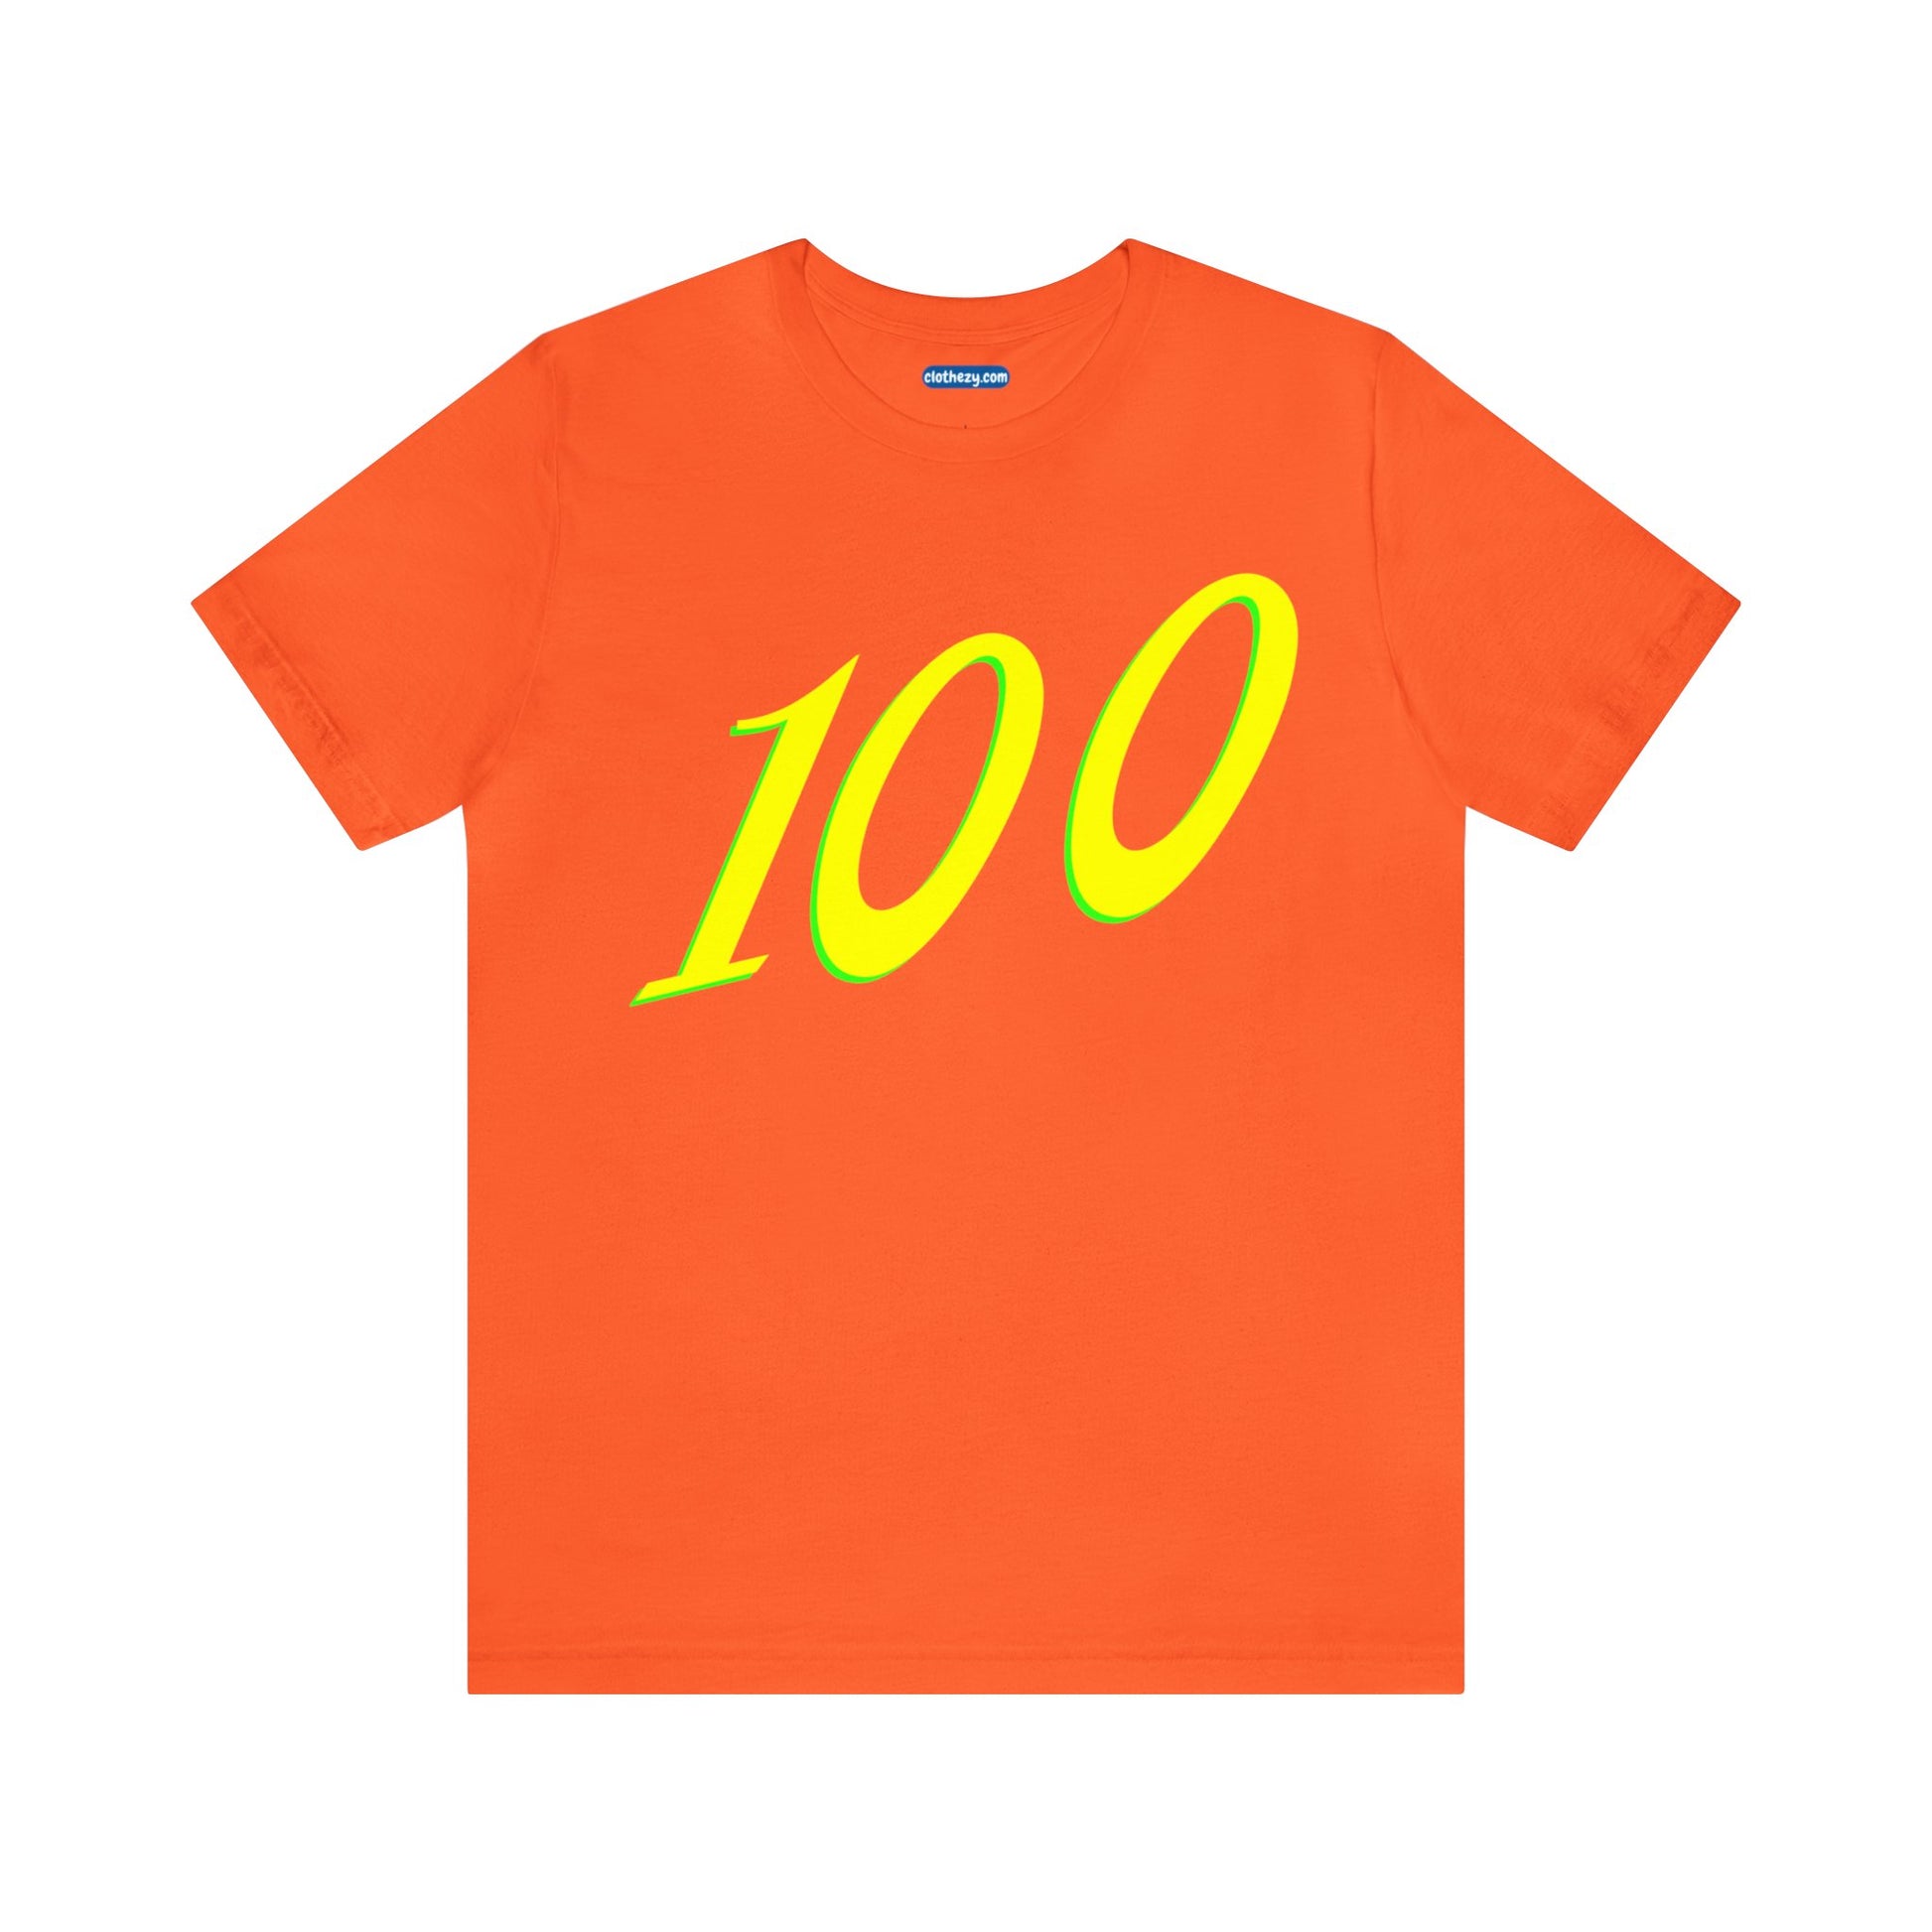 Number 100 Design - Soft Cotton Tee for birthdays and celebrations, Gift for friends and family, Multiple Options by clothezy.com in Orange Size Small - Buy Now